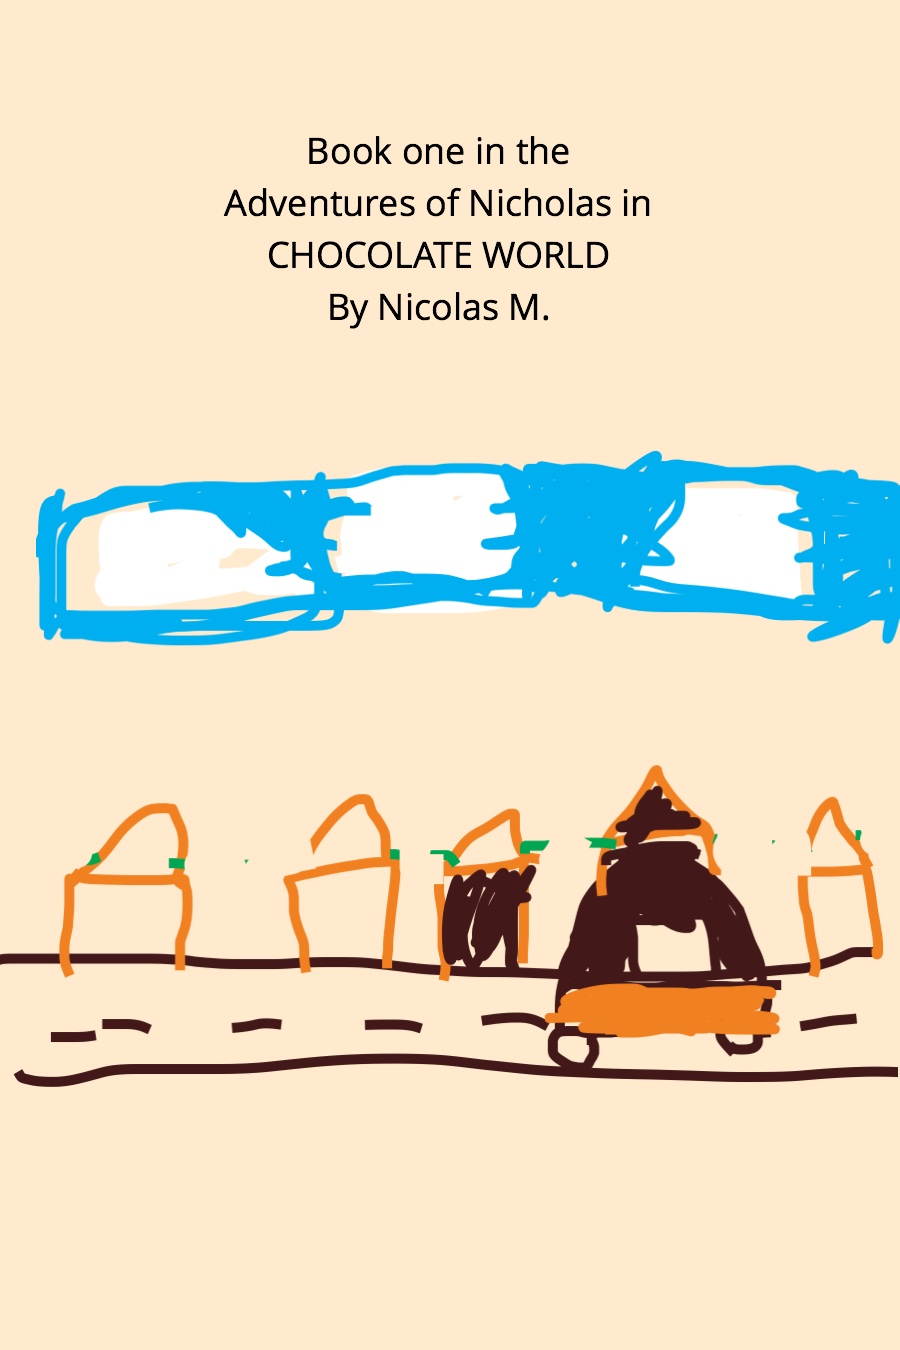 The Adventures of Nicholas in Chocolate World by Nicholas M